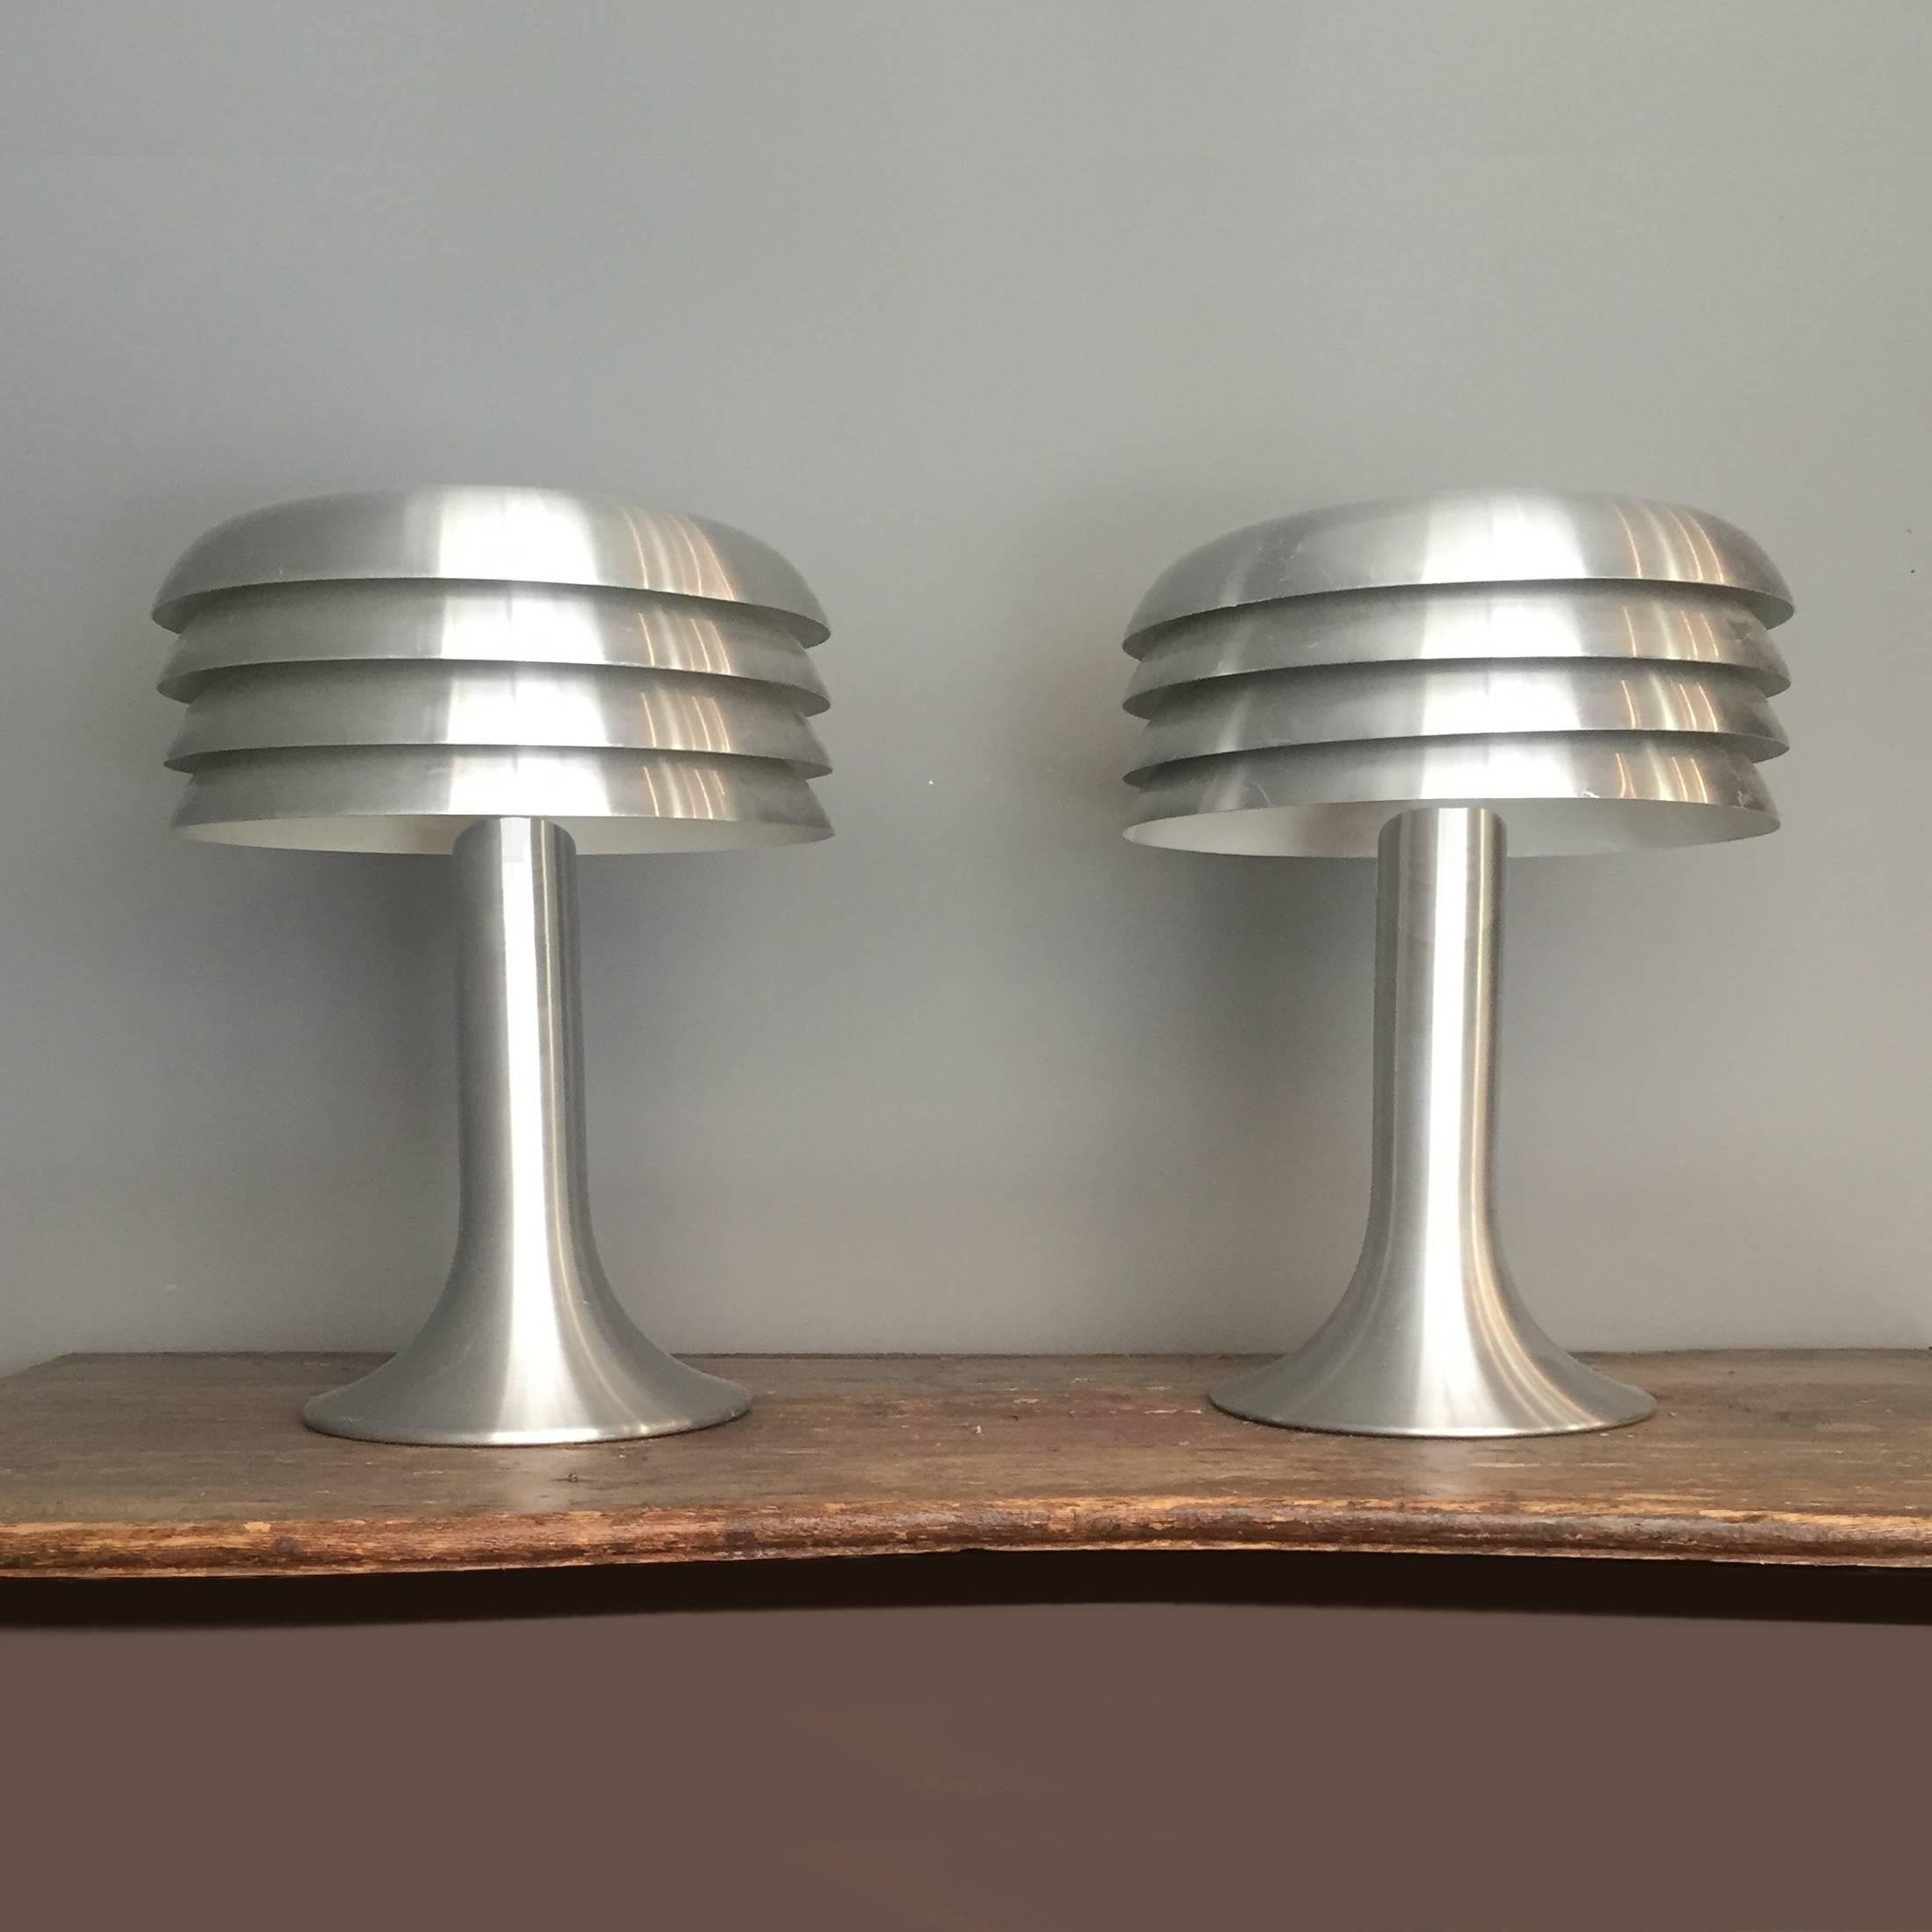 Scandinavian design class by Hans-Agne Jakobsson. Pair of gently brushed chrome lamps with four tiered integral shade. Model BN-26, produced by Hans-Agne Jakobsson AB in Markaryd, Sweden.

   